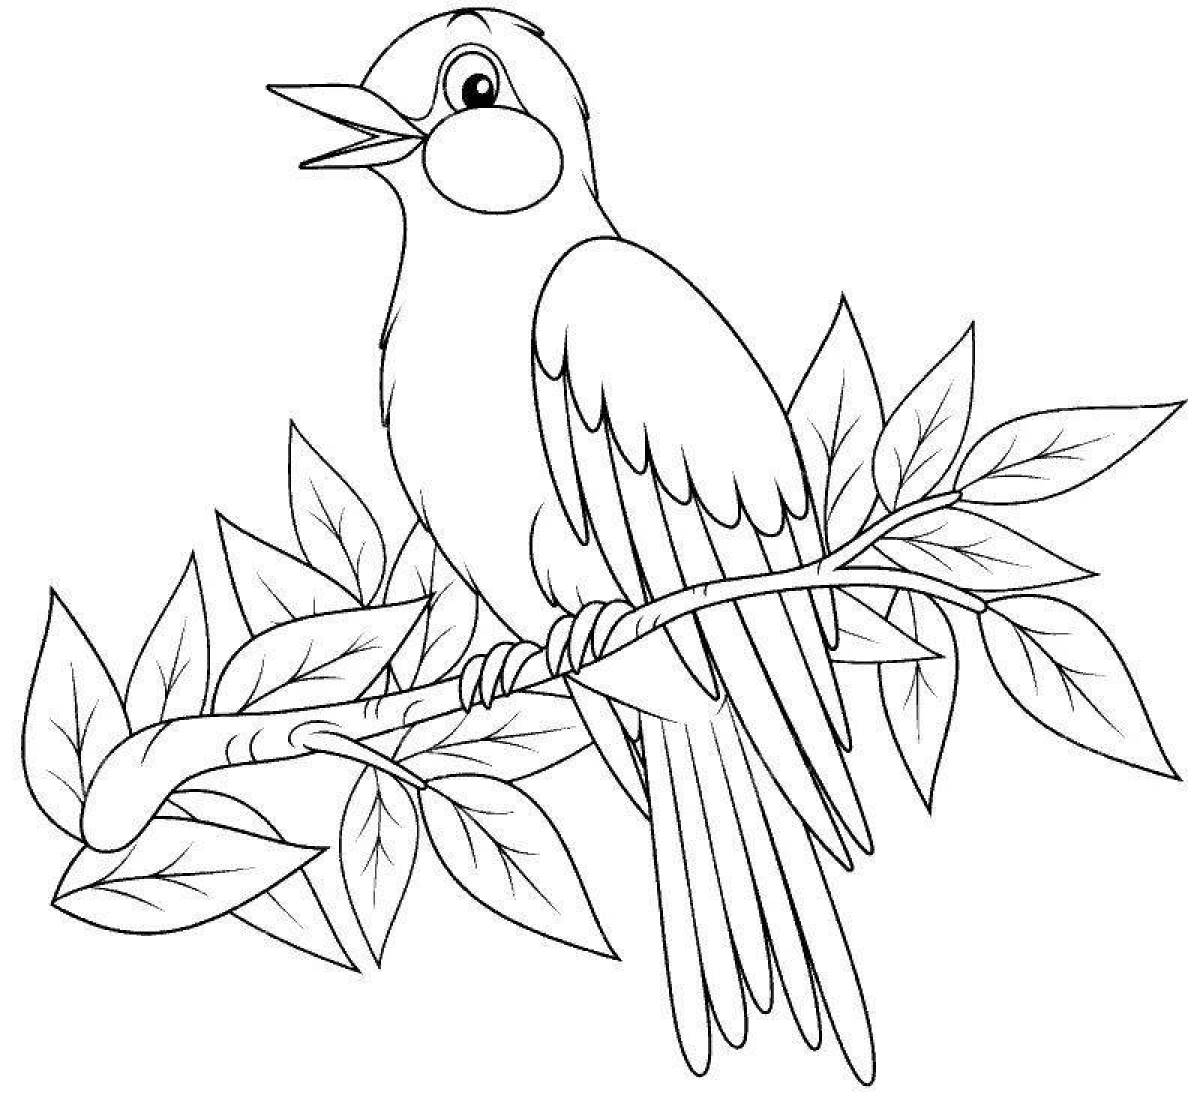 Colorful crow coloring page